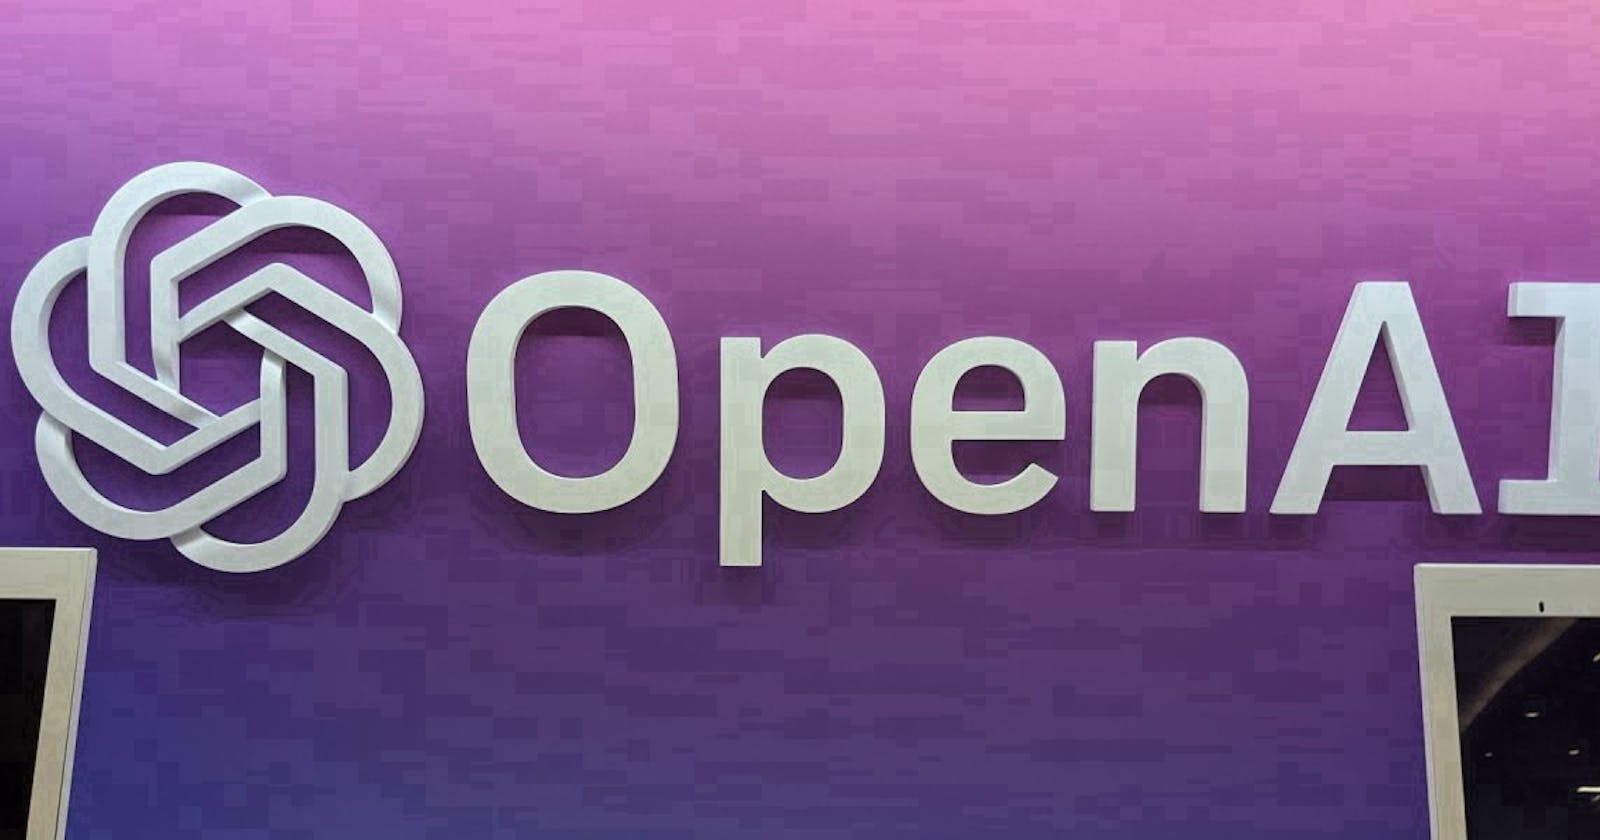 What is Open AI